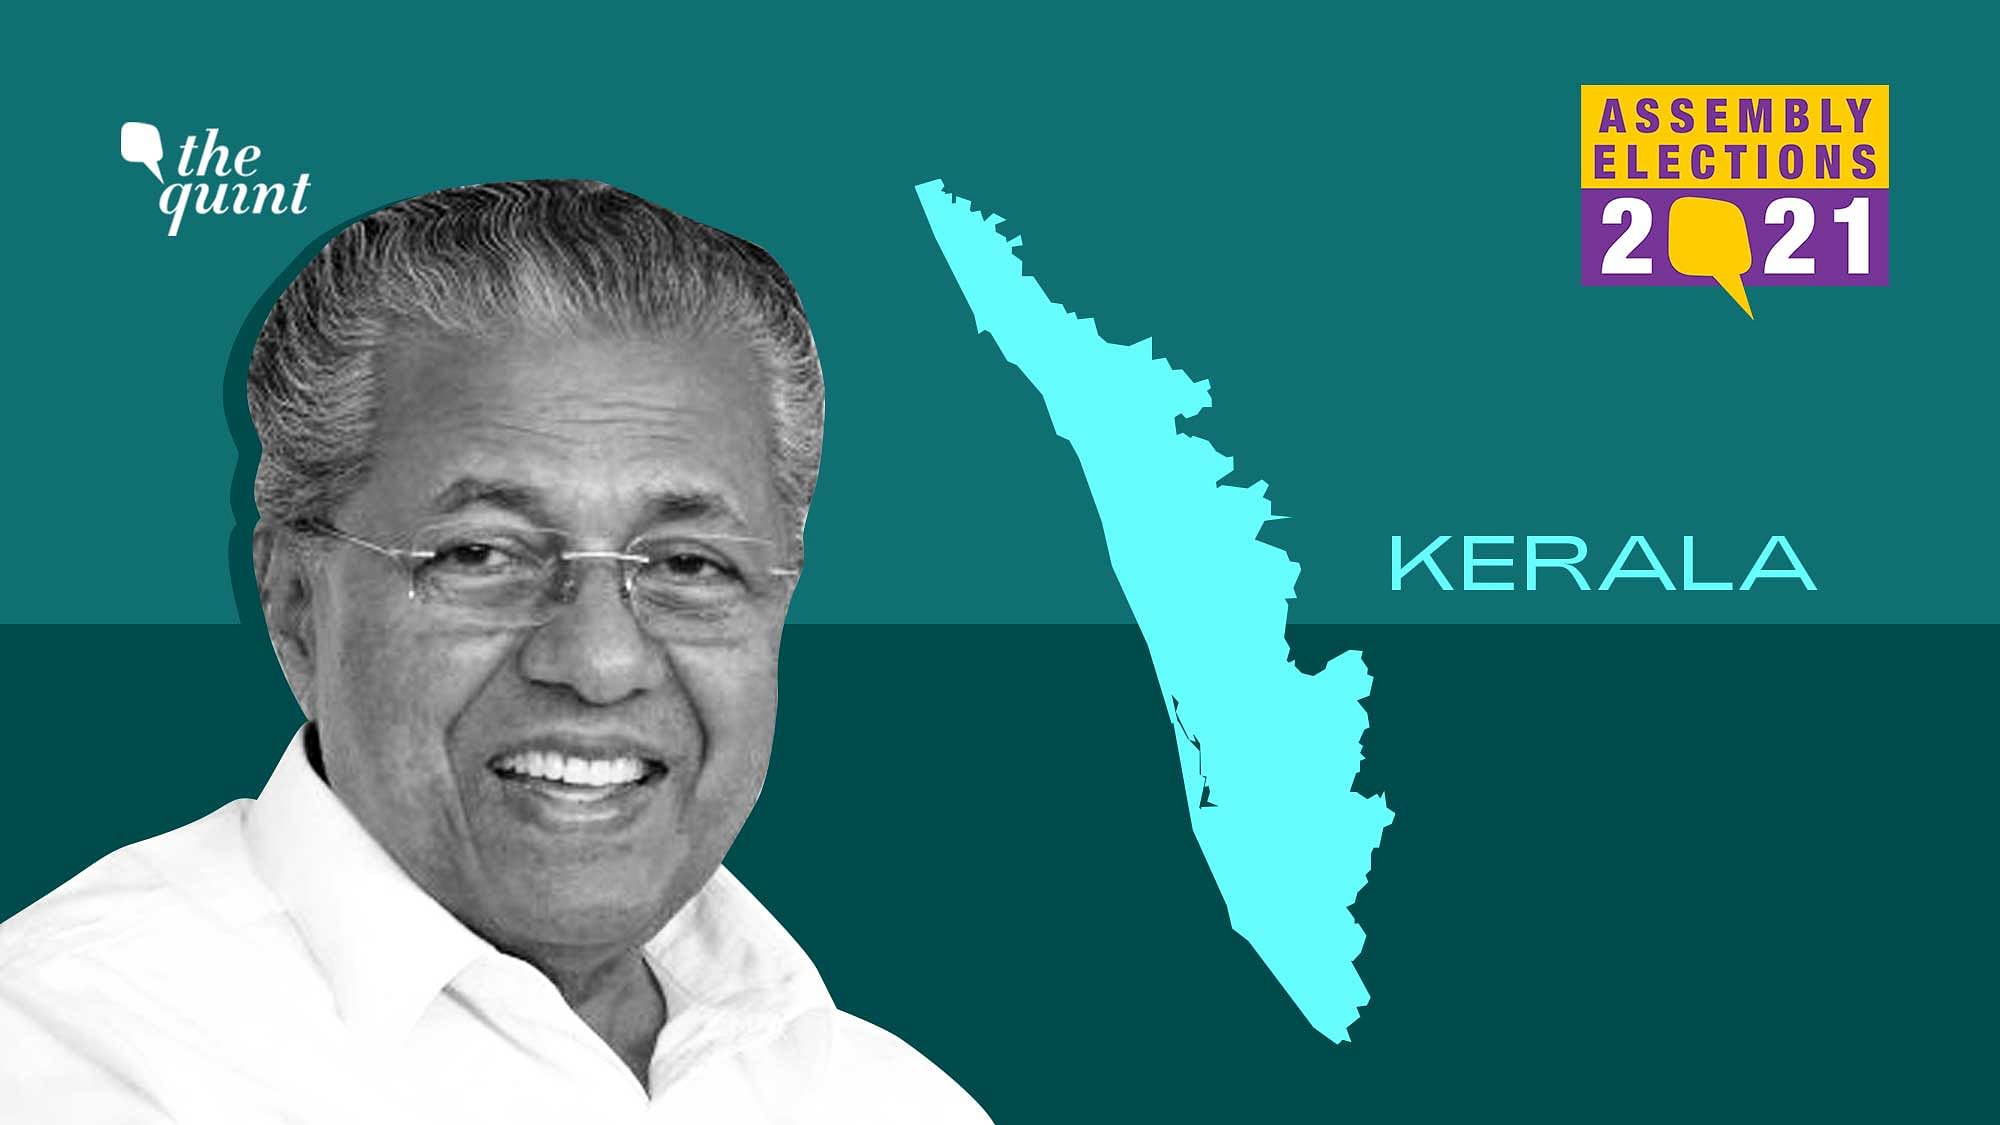 Pinayayi Vijayan leads Left Democratic Front to a rare second consecutive victory in Legislative Assembly elections in Kerala.